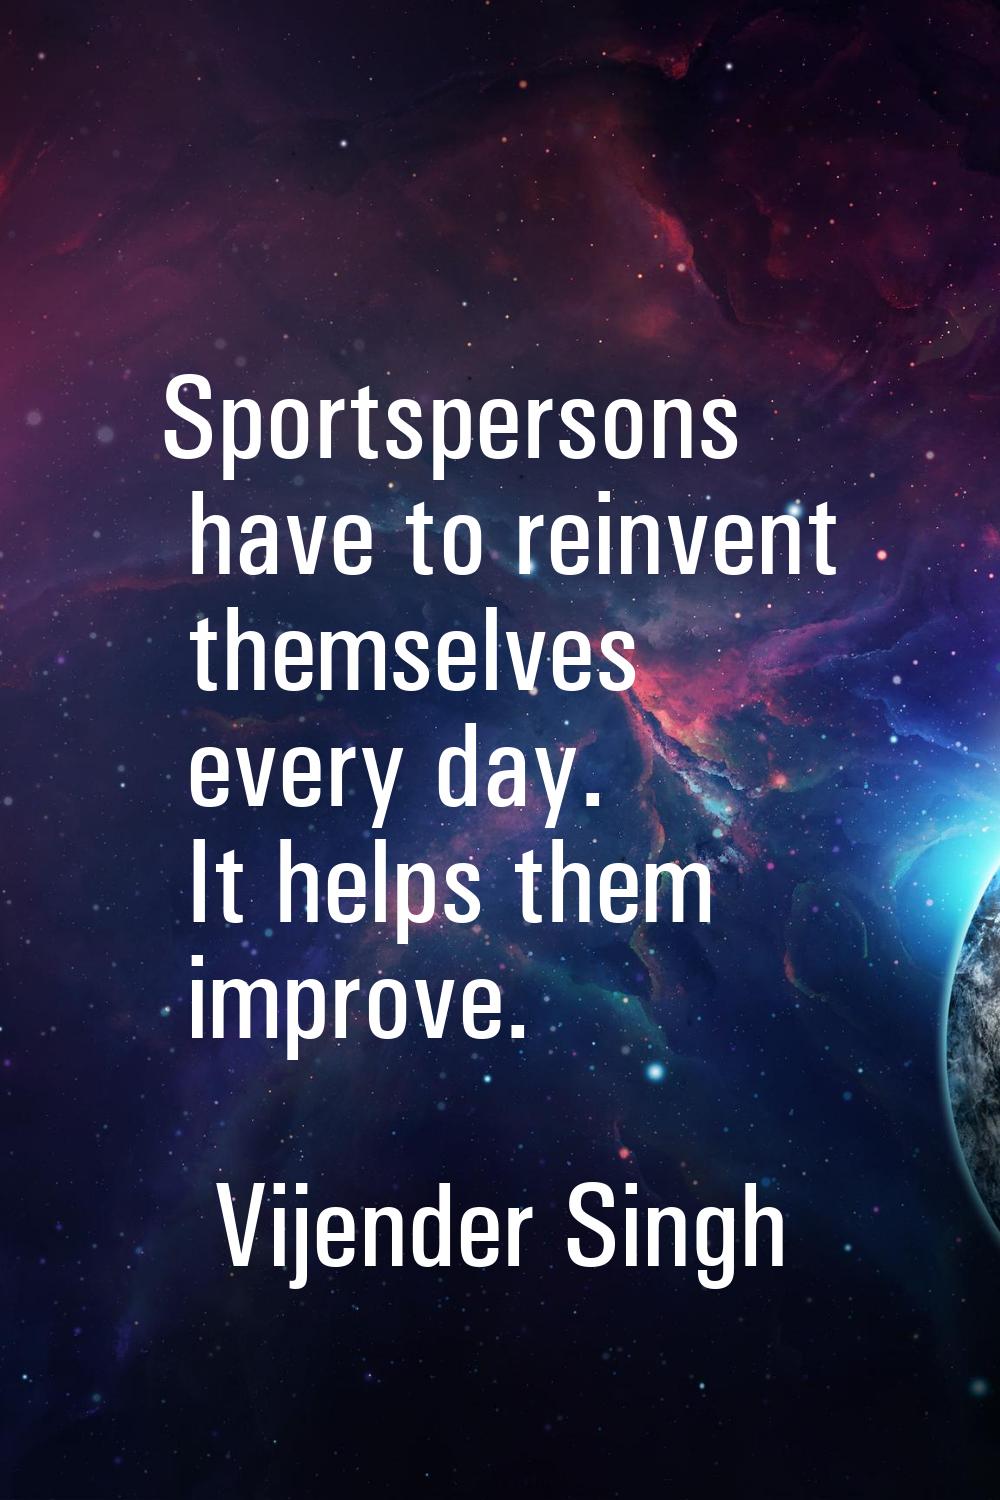 Sportspersons have to reinvent themselves every day. It helps them improve.